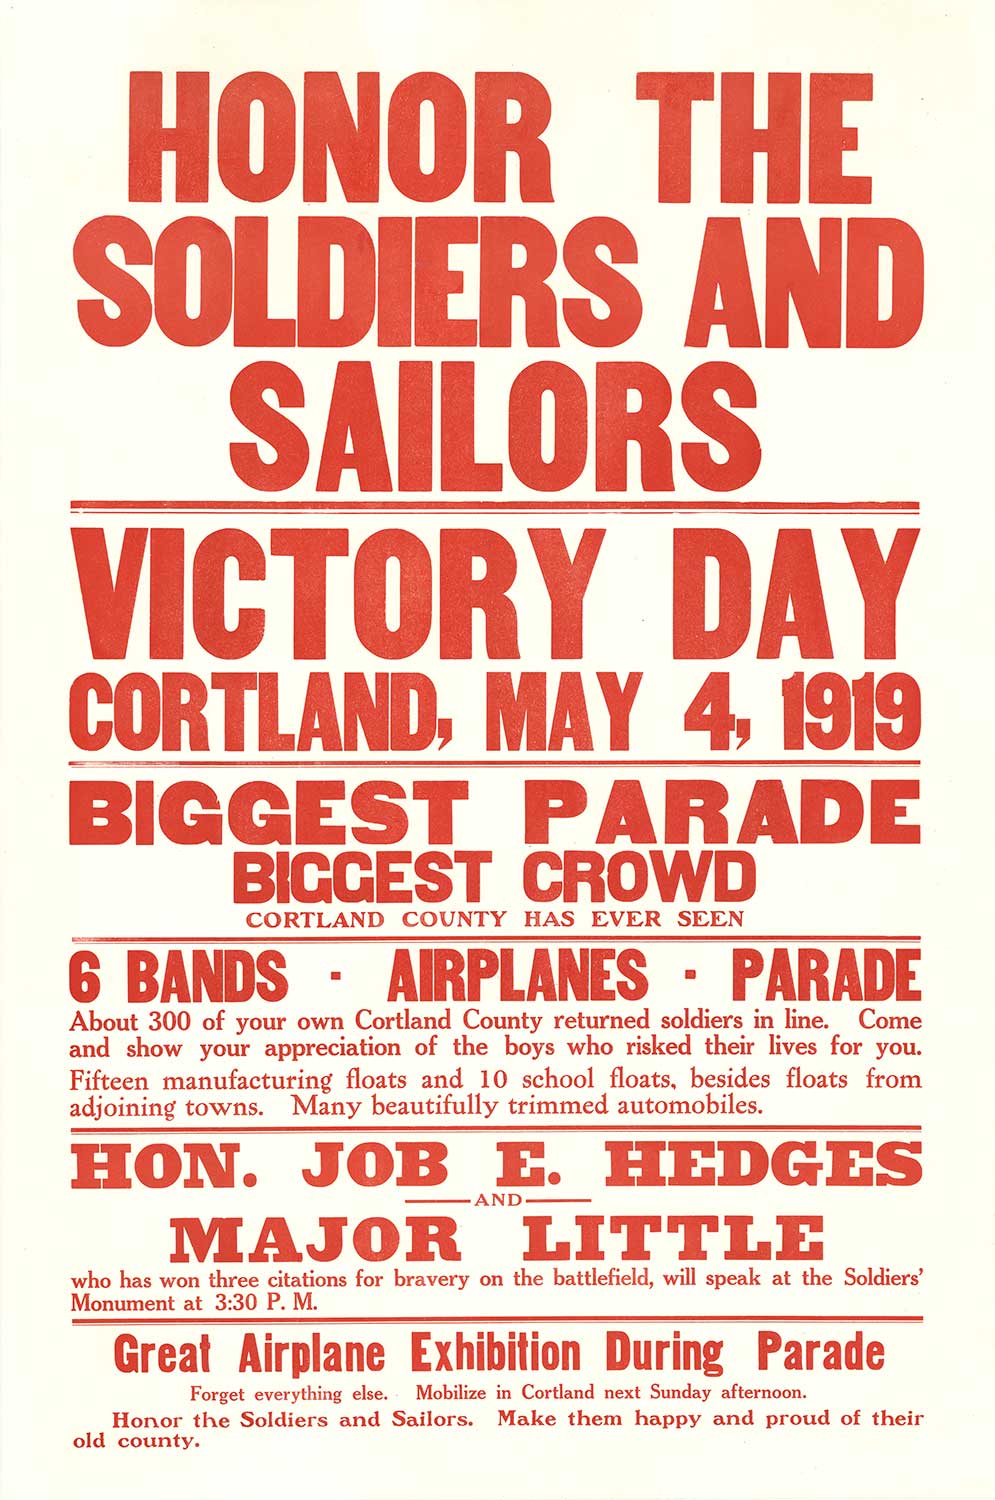 Original 1919 ‘Honor The Soldiers and Sailors’ Victory Day, Corland (NY) May 4, 1919. <br>An original vintage military poster printed for a 1 day event. Archival linen backed and ready to frame. Very good condition, and rare.